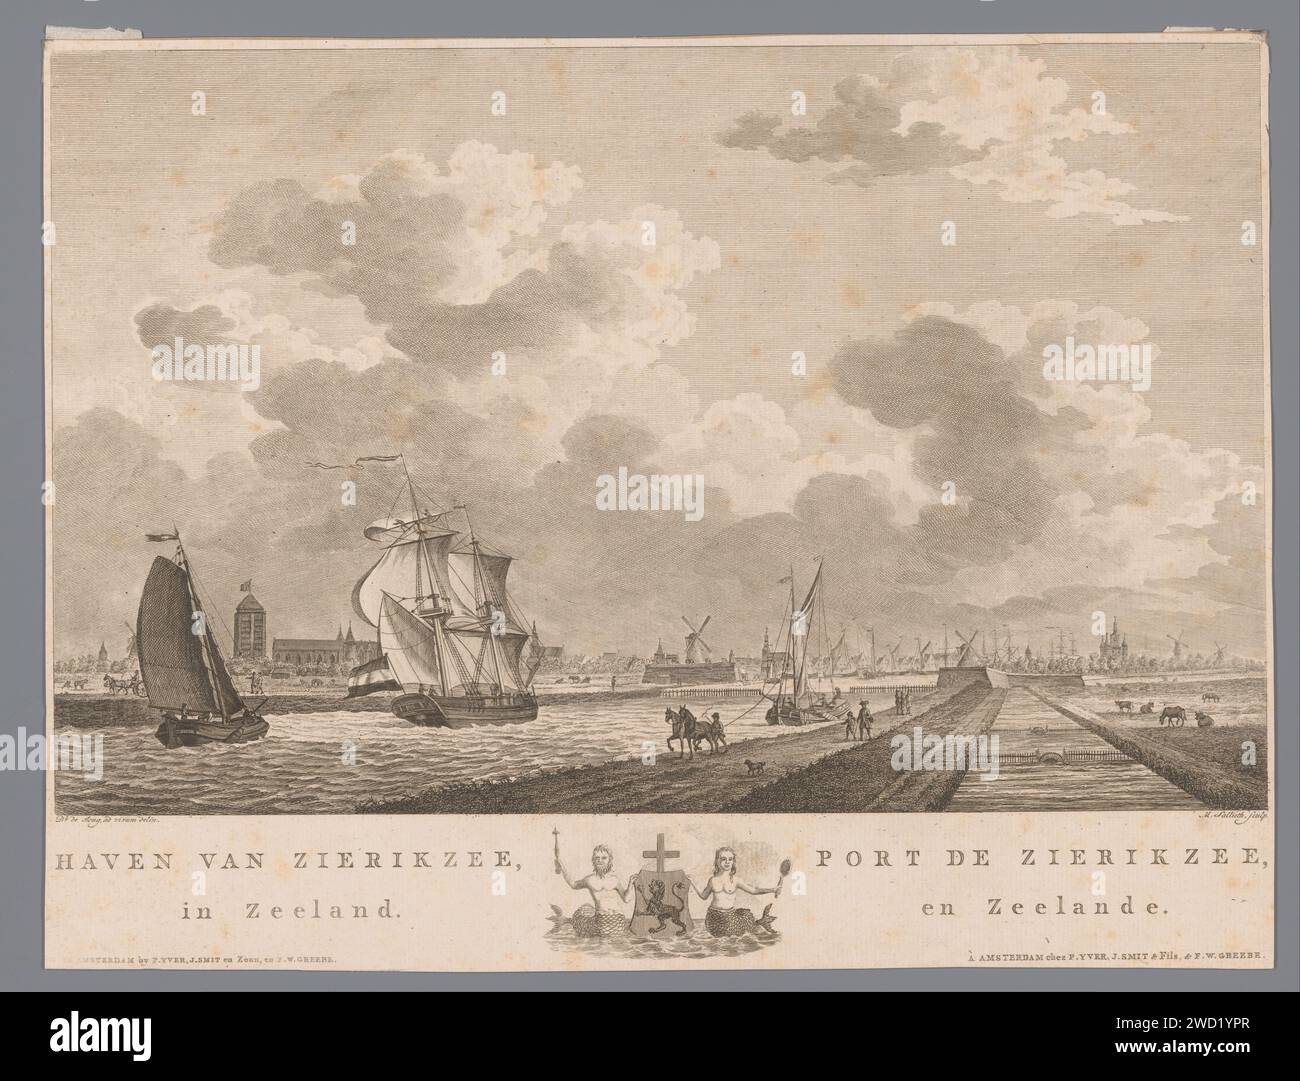 View of the port of Zierikzee, Mathias de Sallieth, after Dirk de Jong, 1779 - 1787 print View of the port of Zierikzee with different boats. Left in the background the Sint-Lievensmonsterkerk. In the margin the title in Dutch and French with the coat of arms of the city in the middle. Numbered at the top right: 20. After Drawing by: ZierikzeePublisher: Amsterdampublisher: Amsterdampublisher: Amsterdam paper etching / engraving harbour. coat of arms (as symbol of the state, etc.) (+ city; municipal). sailing-ship, sailing-boat. church (exterior) Zierikzee. Sint-Lievensmonsterkerk Stock Photo